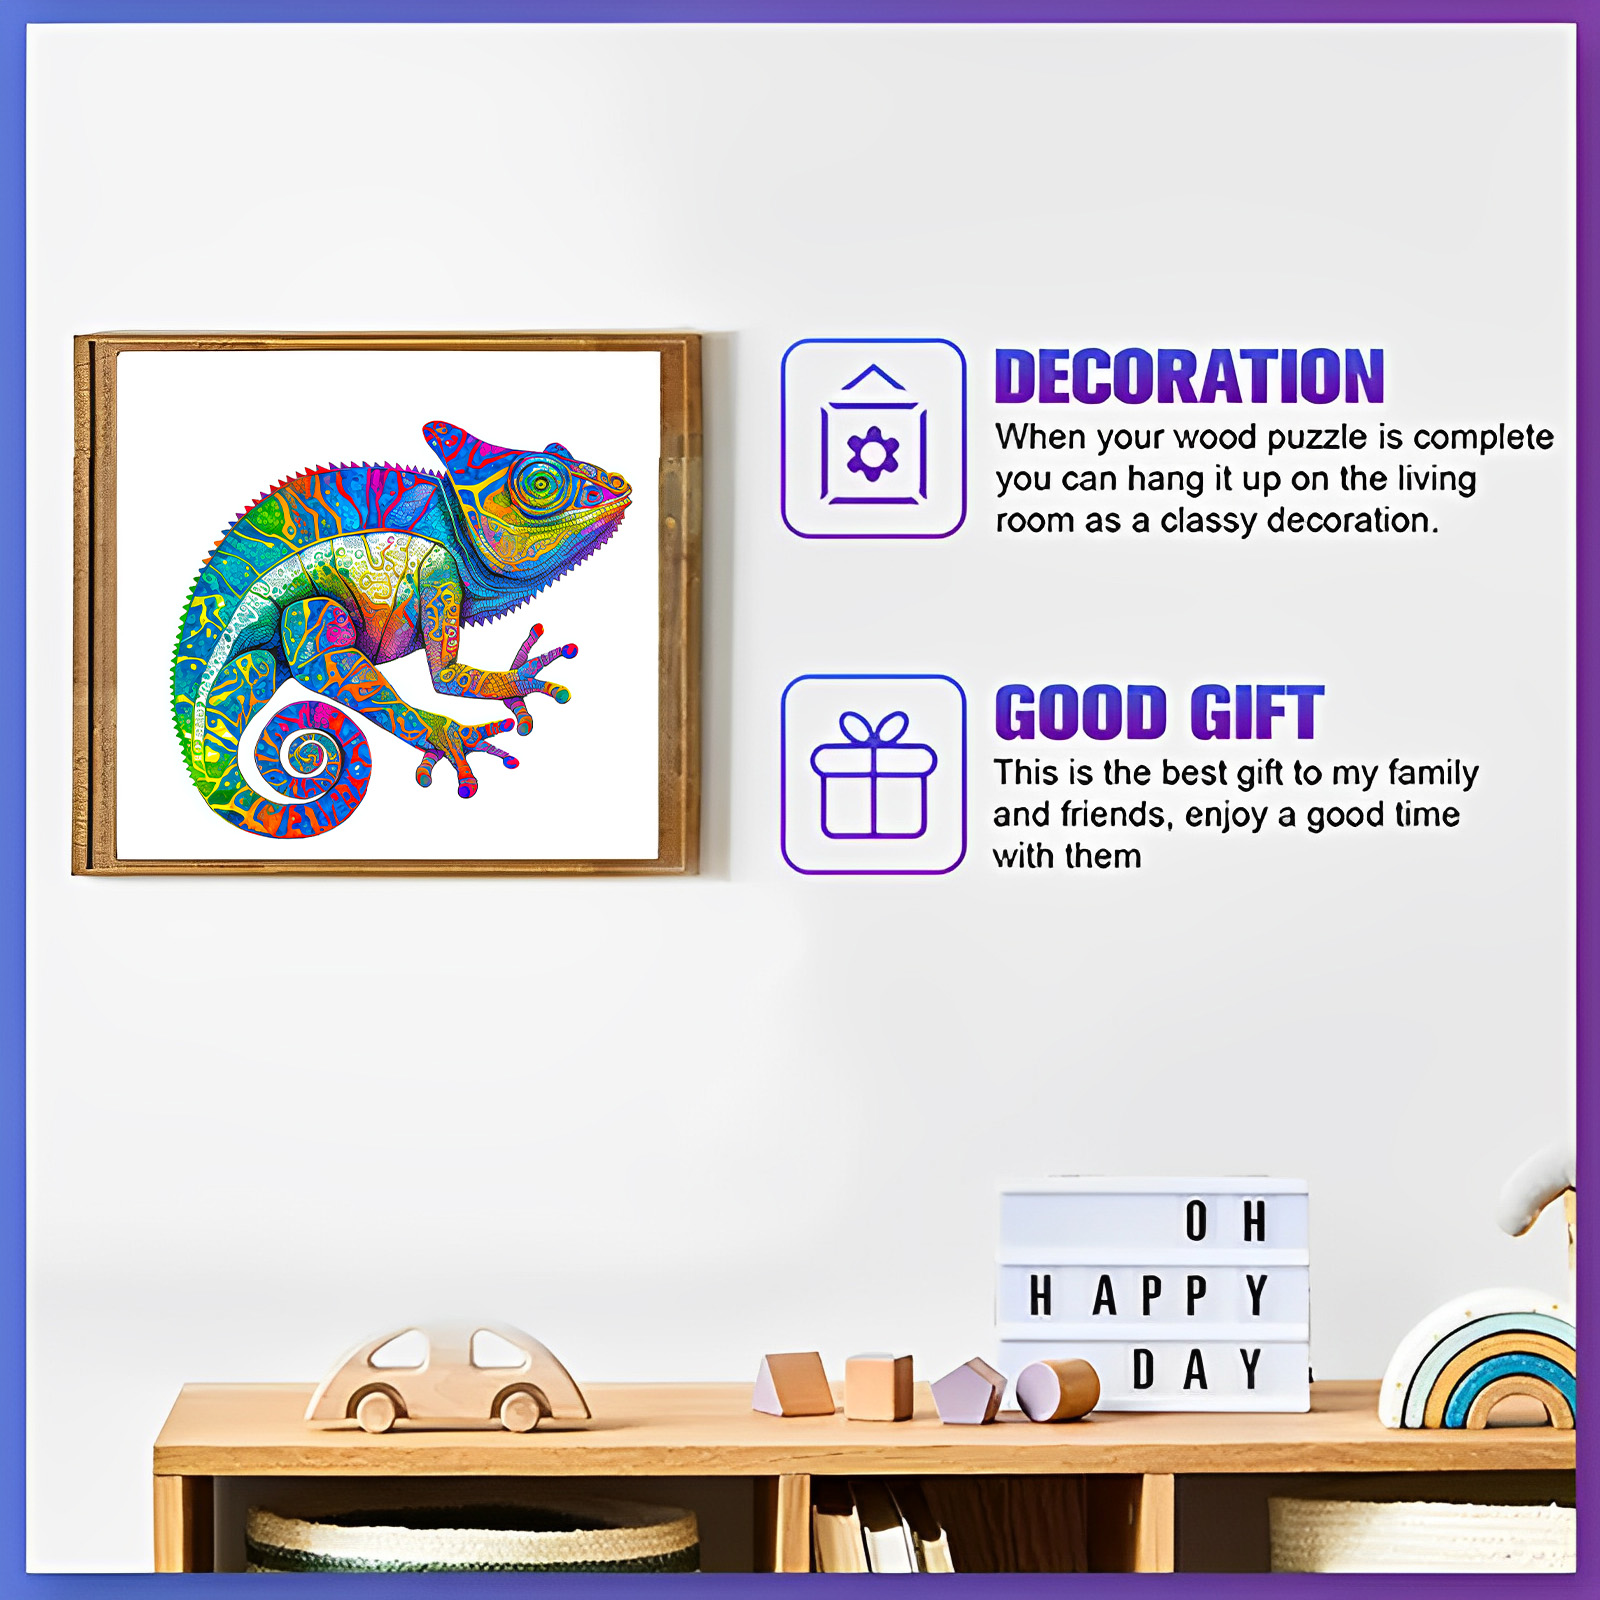 It's time to create! Challenge yourself with this 3D Lizard